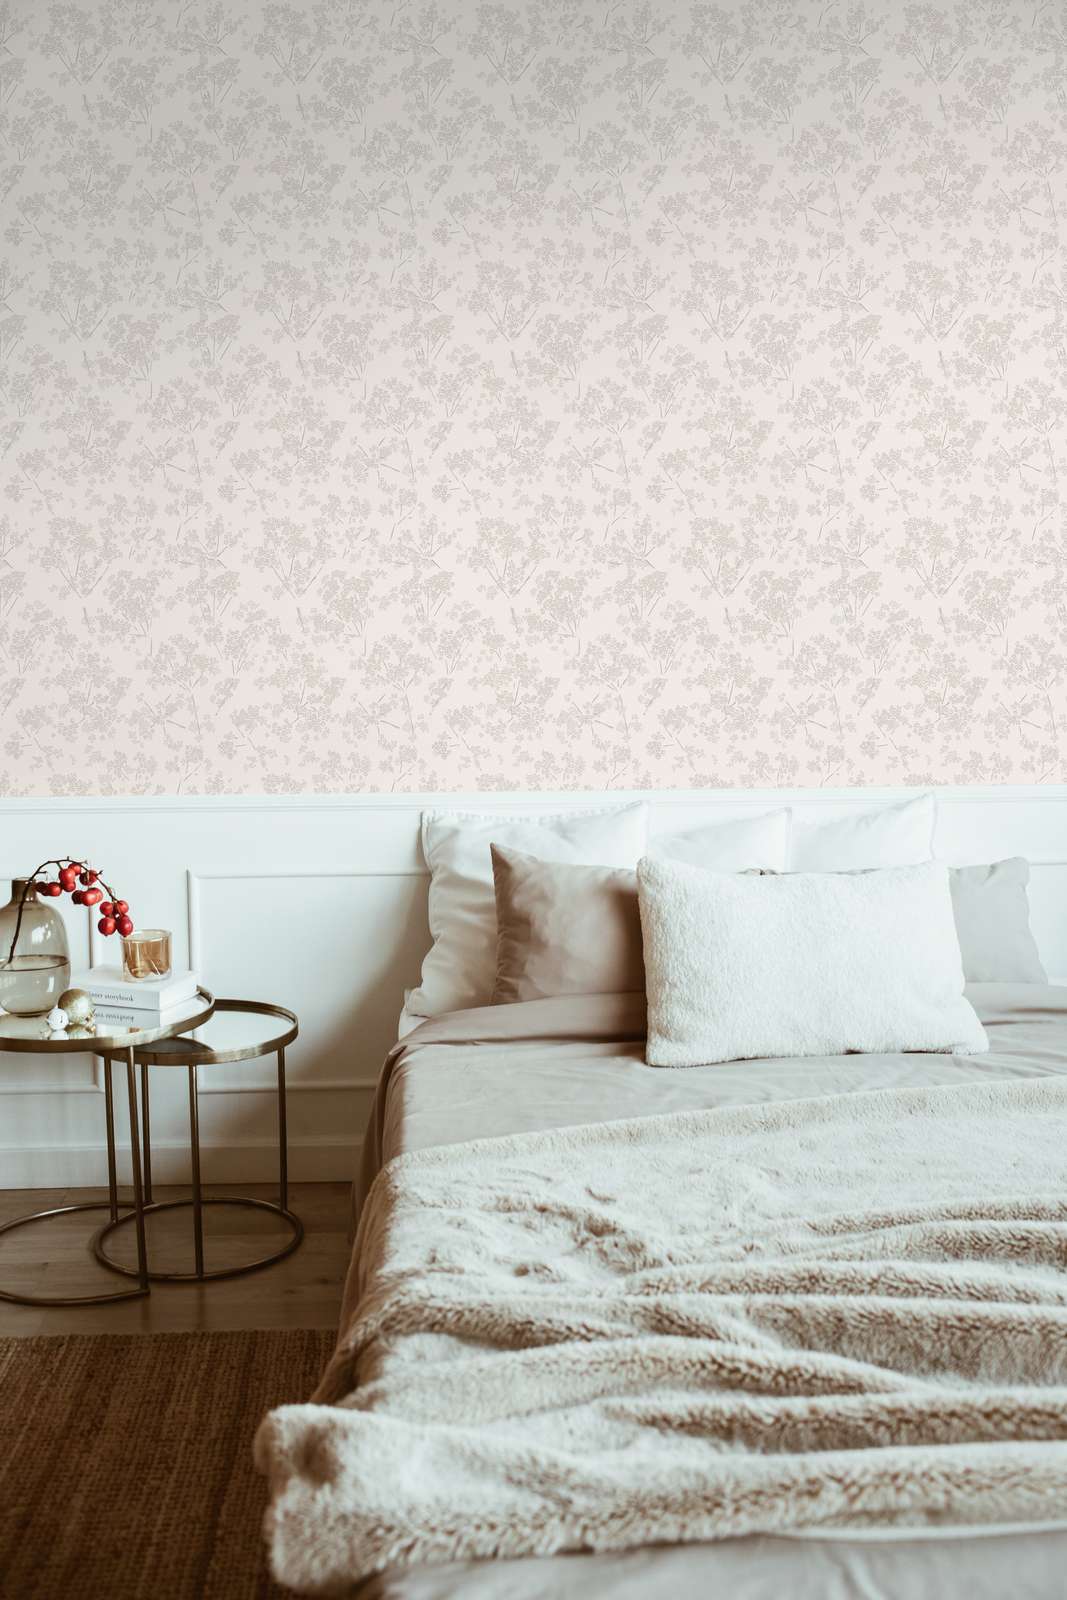             Non-woven wallpaper with floral pattern - white, grey
        